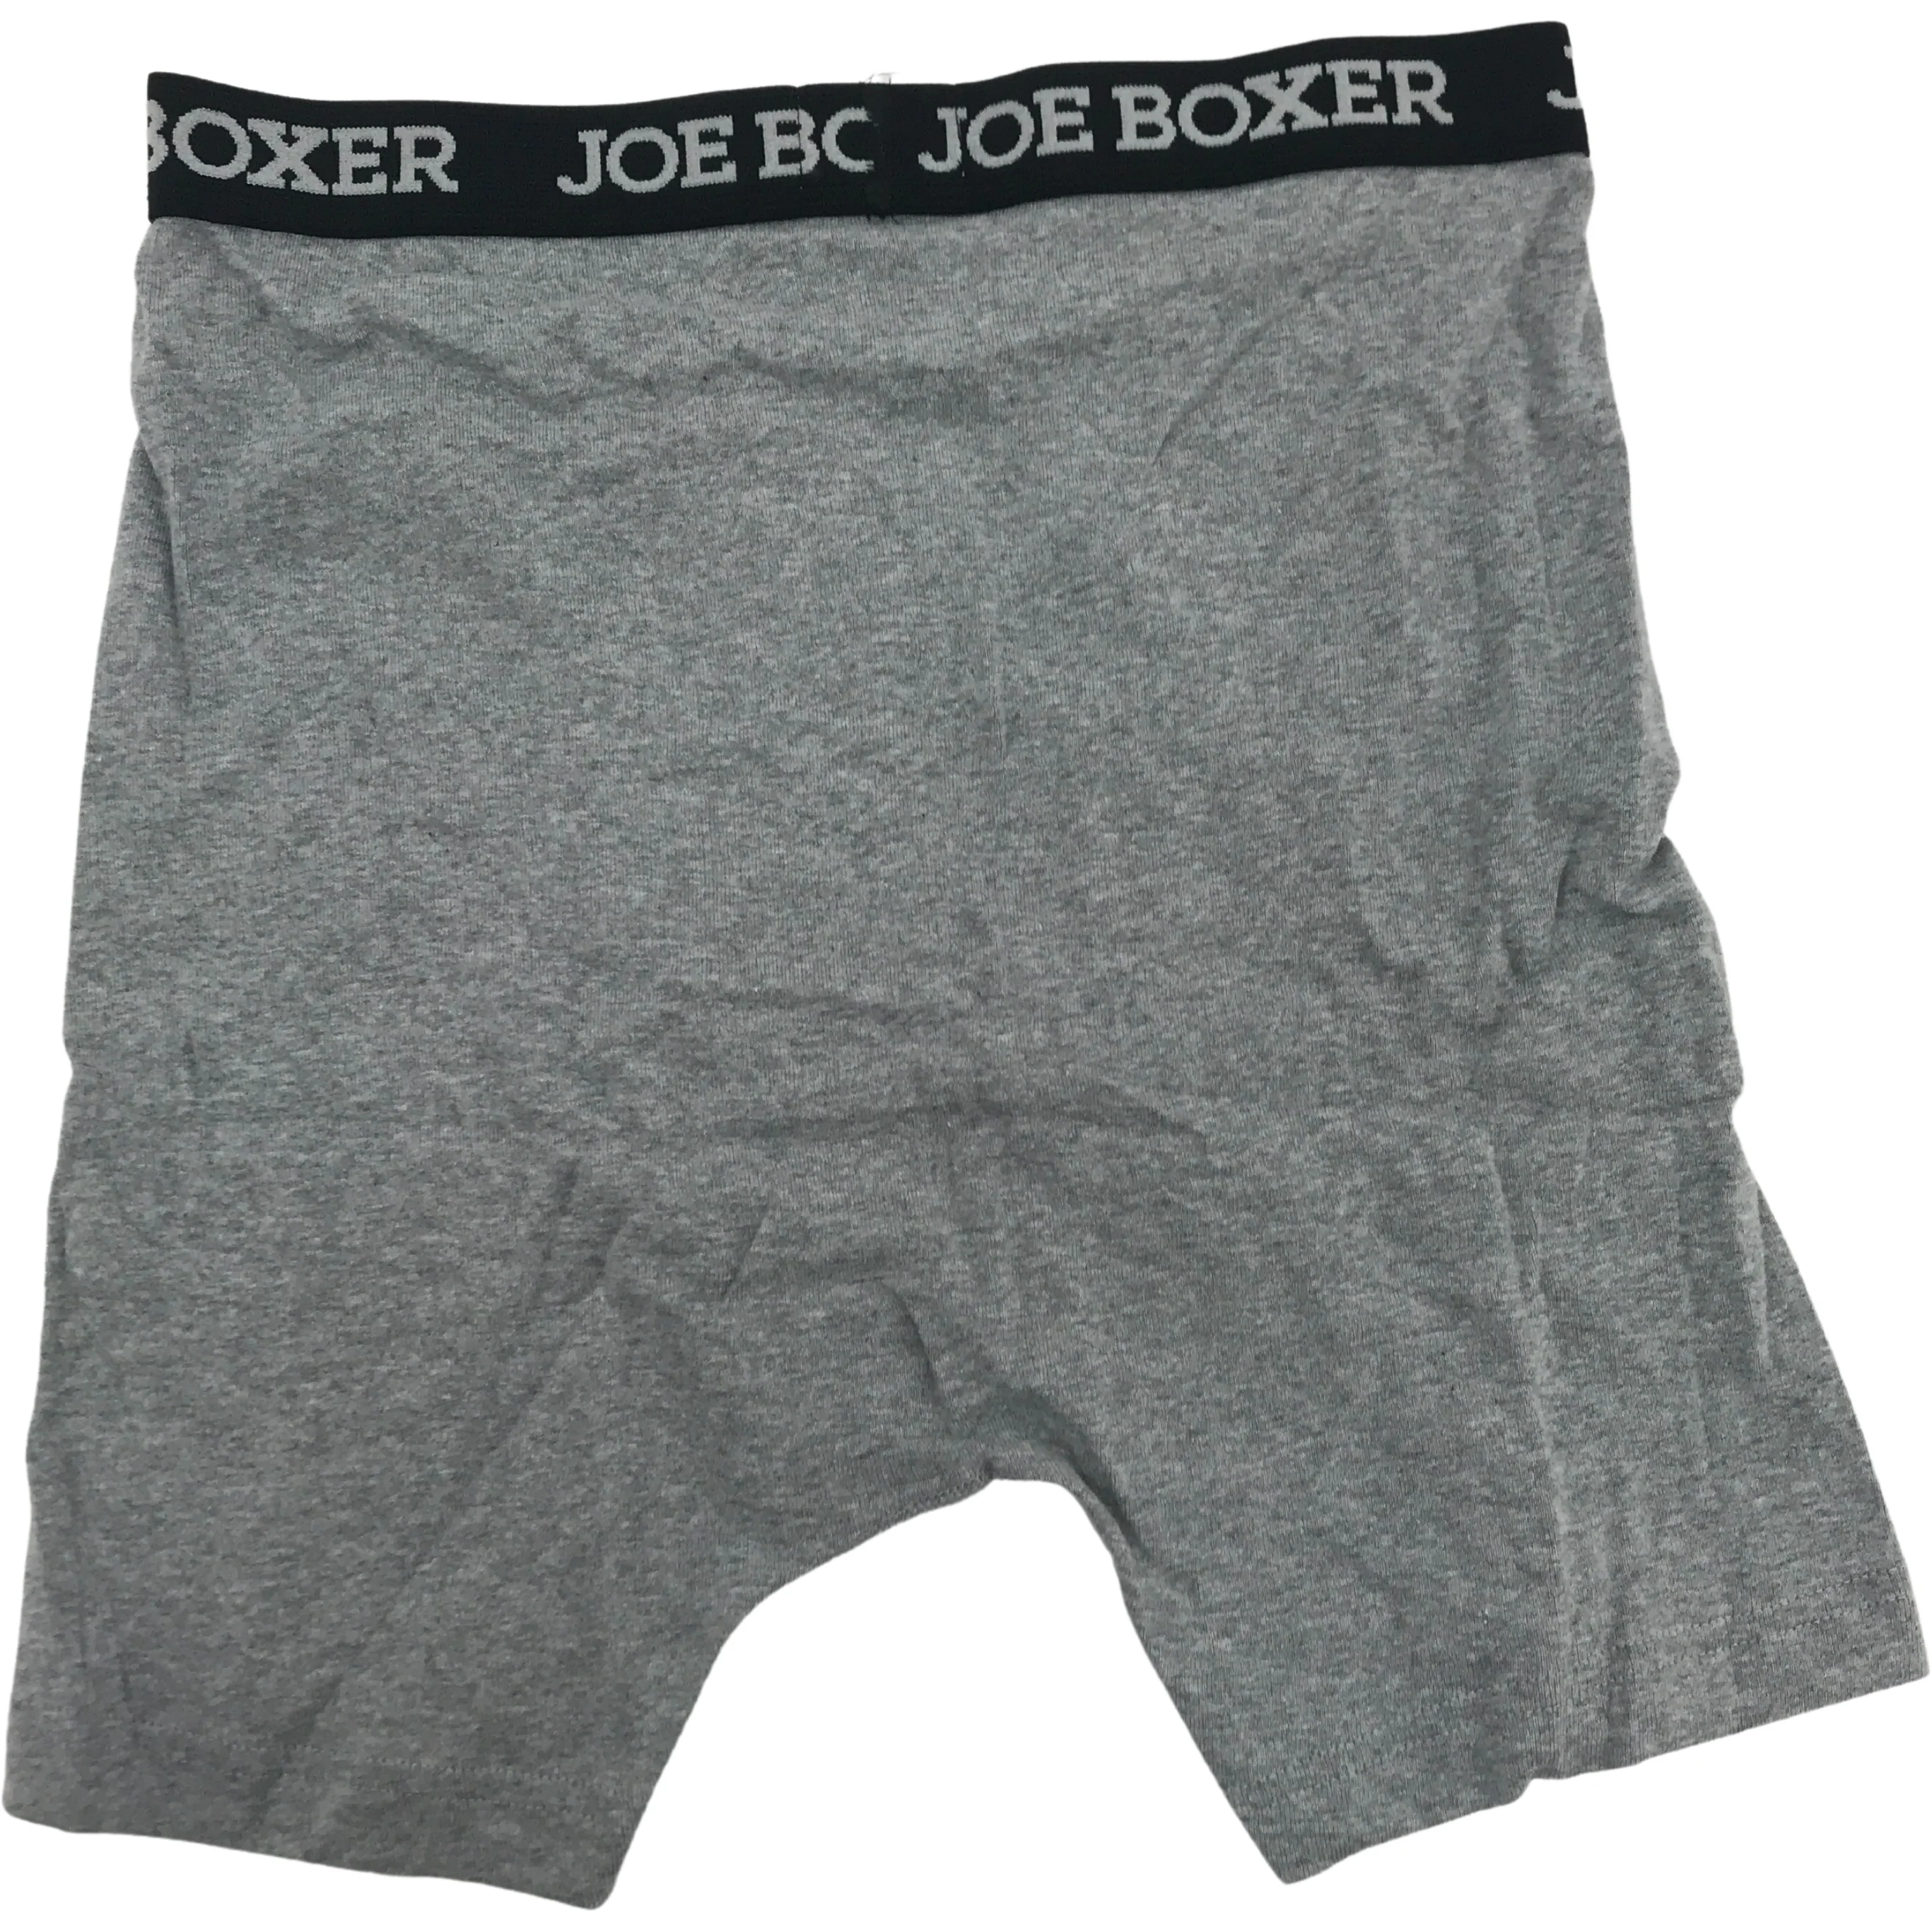 Joe Boxer Men's Underwear / Fitted Boxers / 3 Pack / Grey / Small